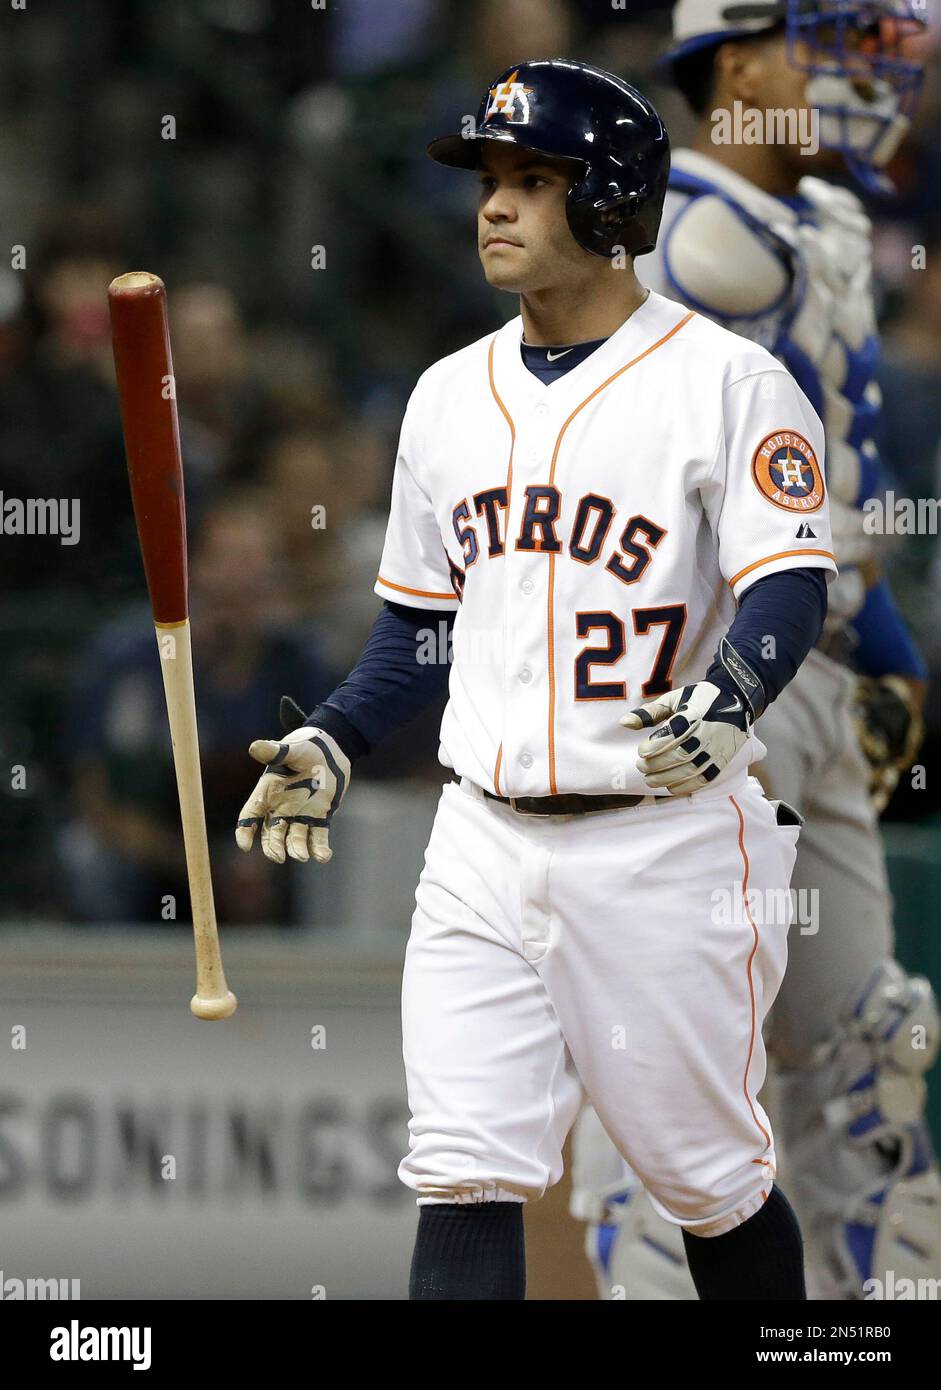 Houston Astros' Jose Altuve tosses his bat after called out on